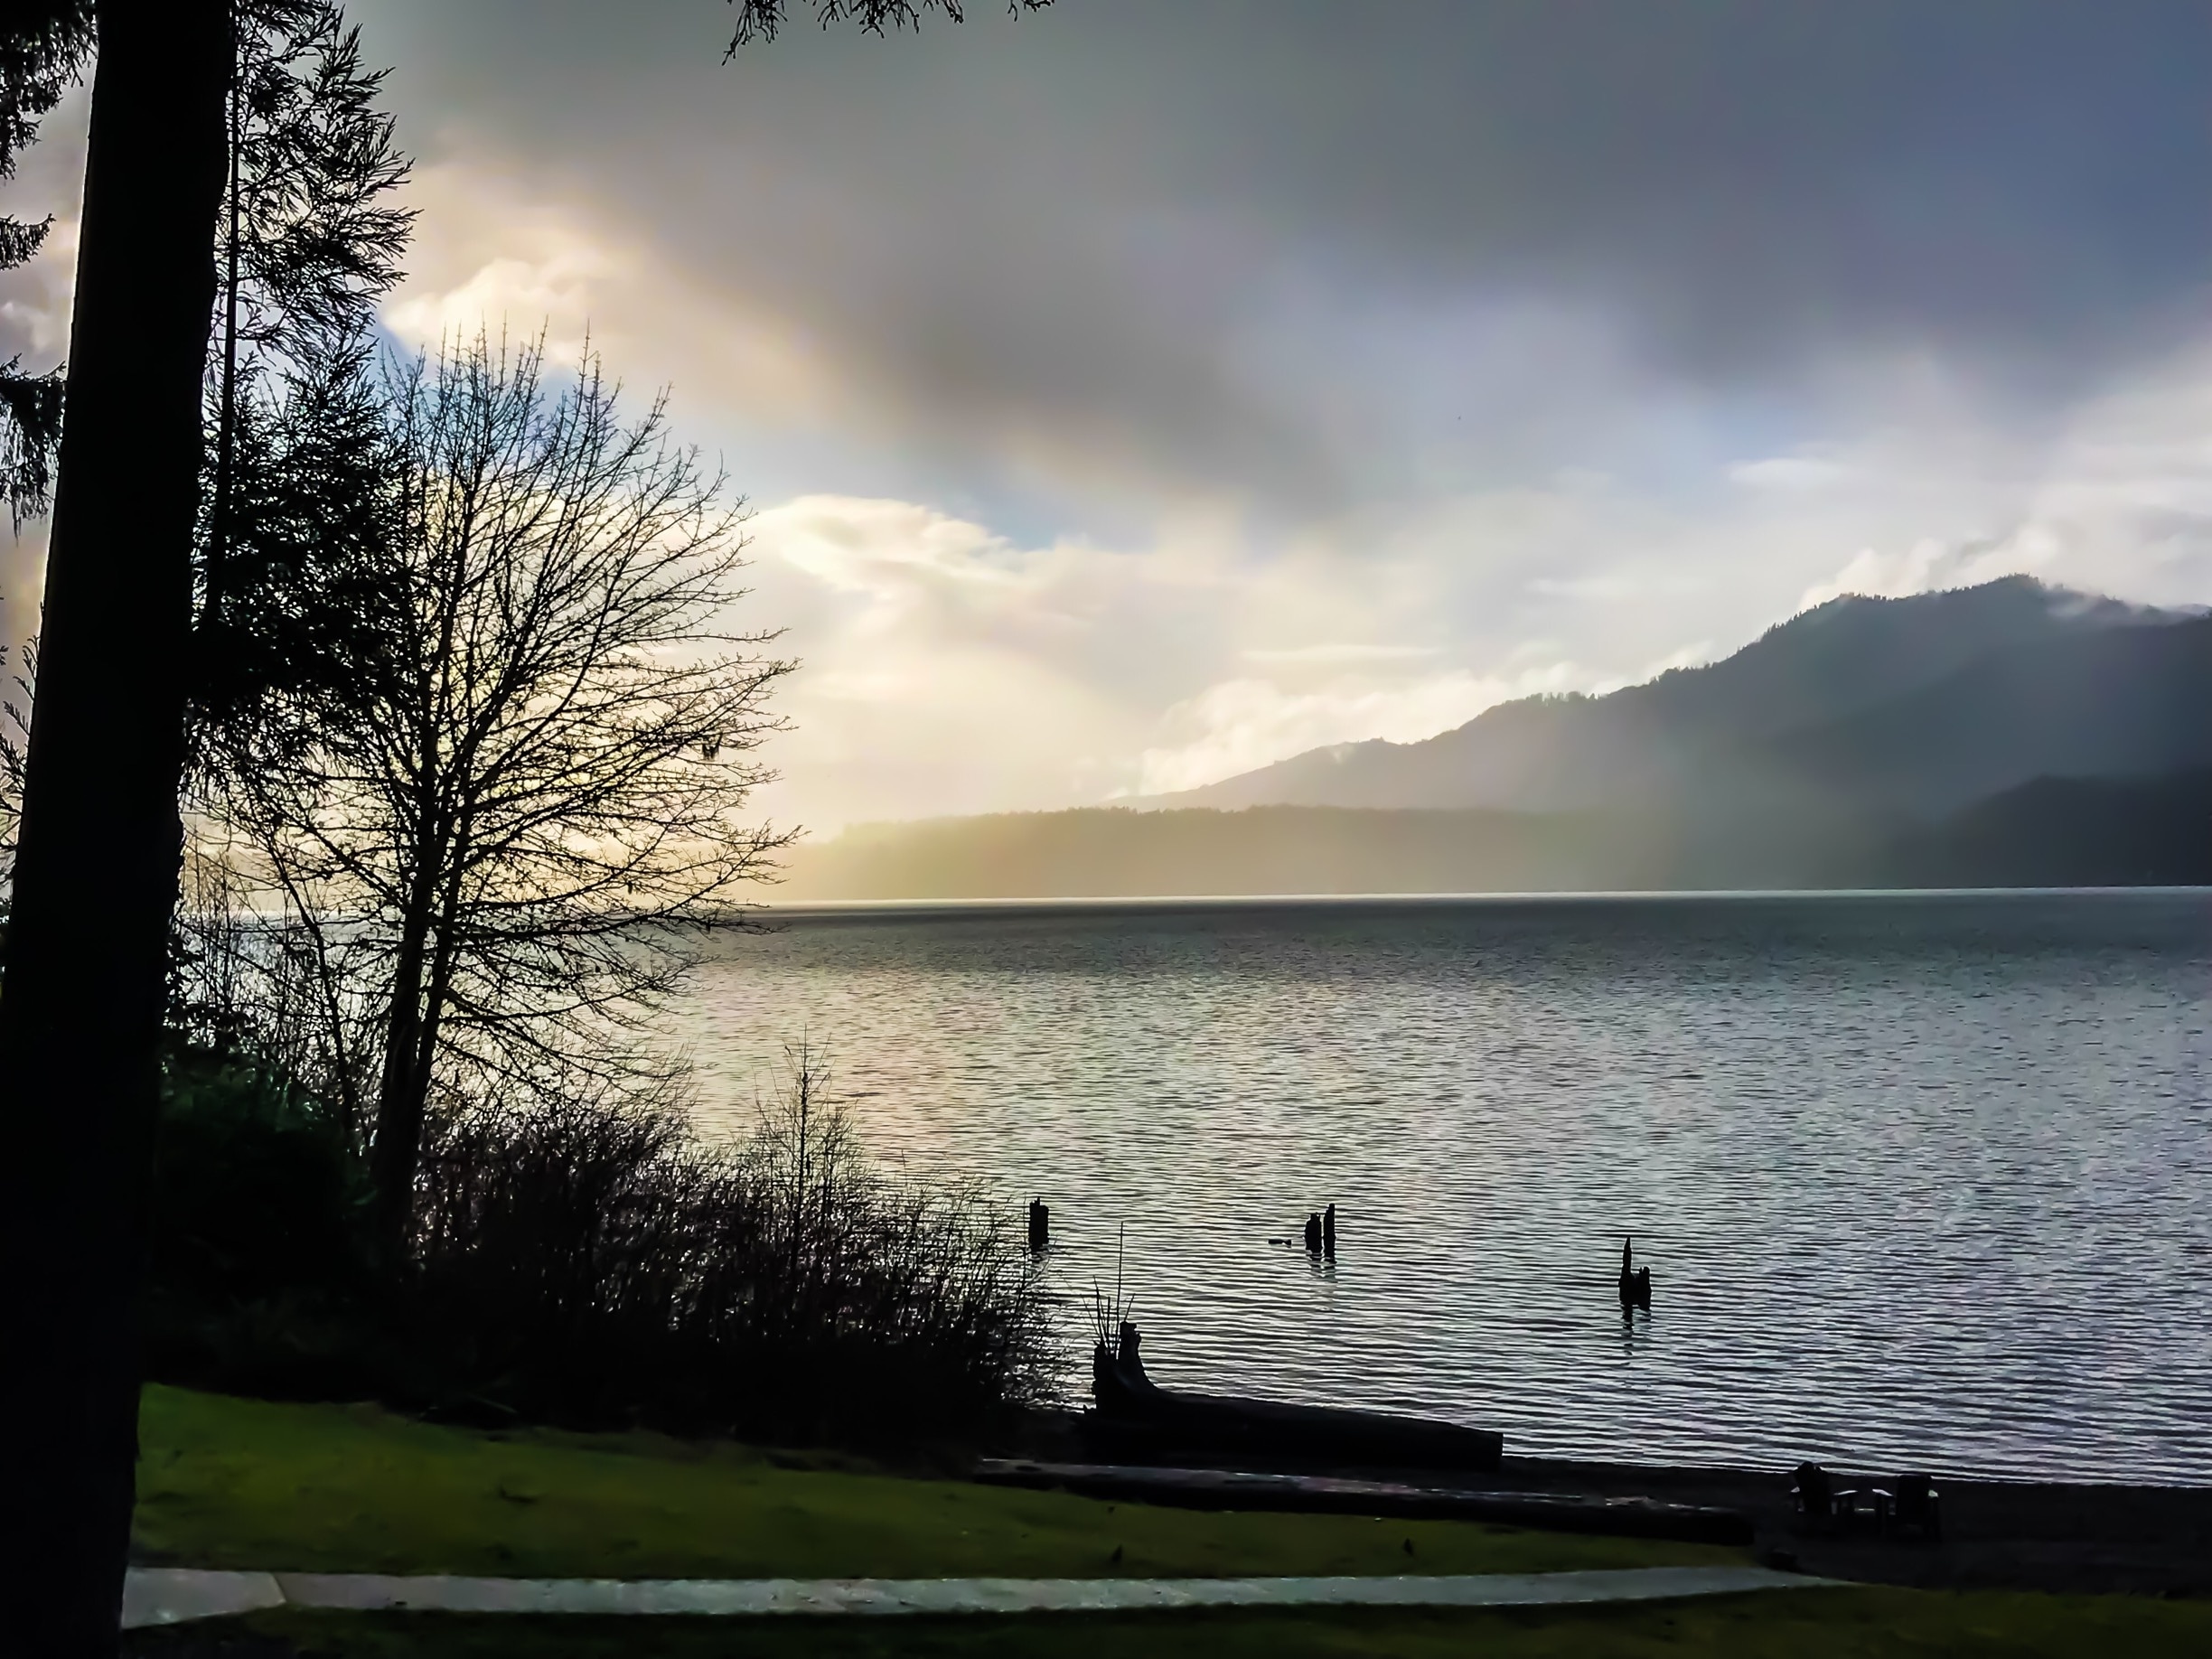 I also hadn’t visited Lake Quinault Lodge in years. It was peaceful and quiet. A little too quiet for teens on Spring Break! 😁 #LakeQuinault #OlympicNationalPark #SpringBreak2018 